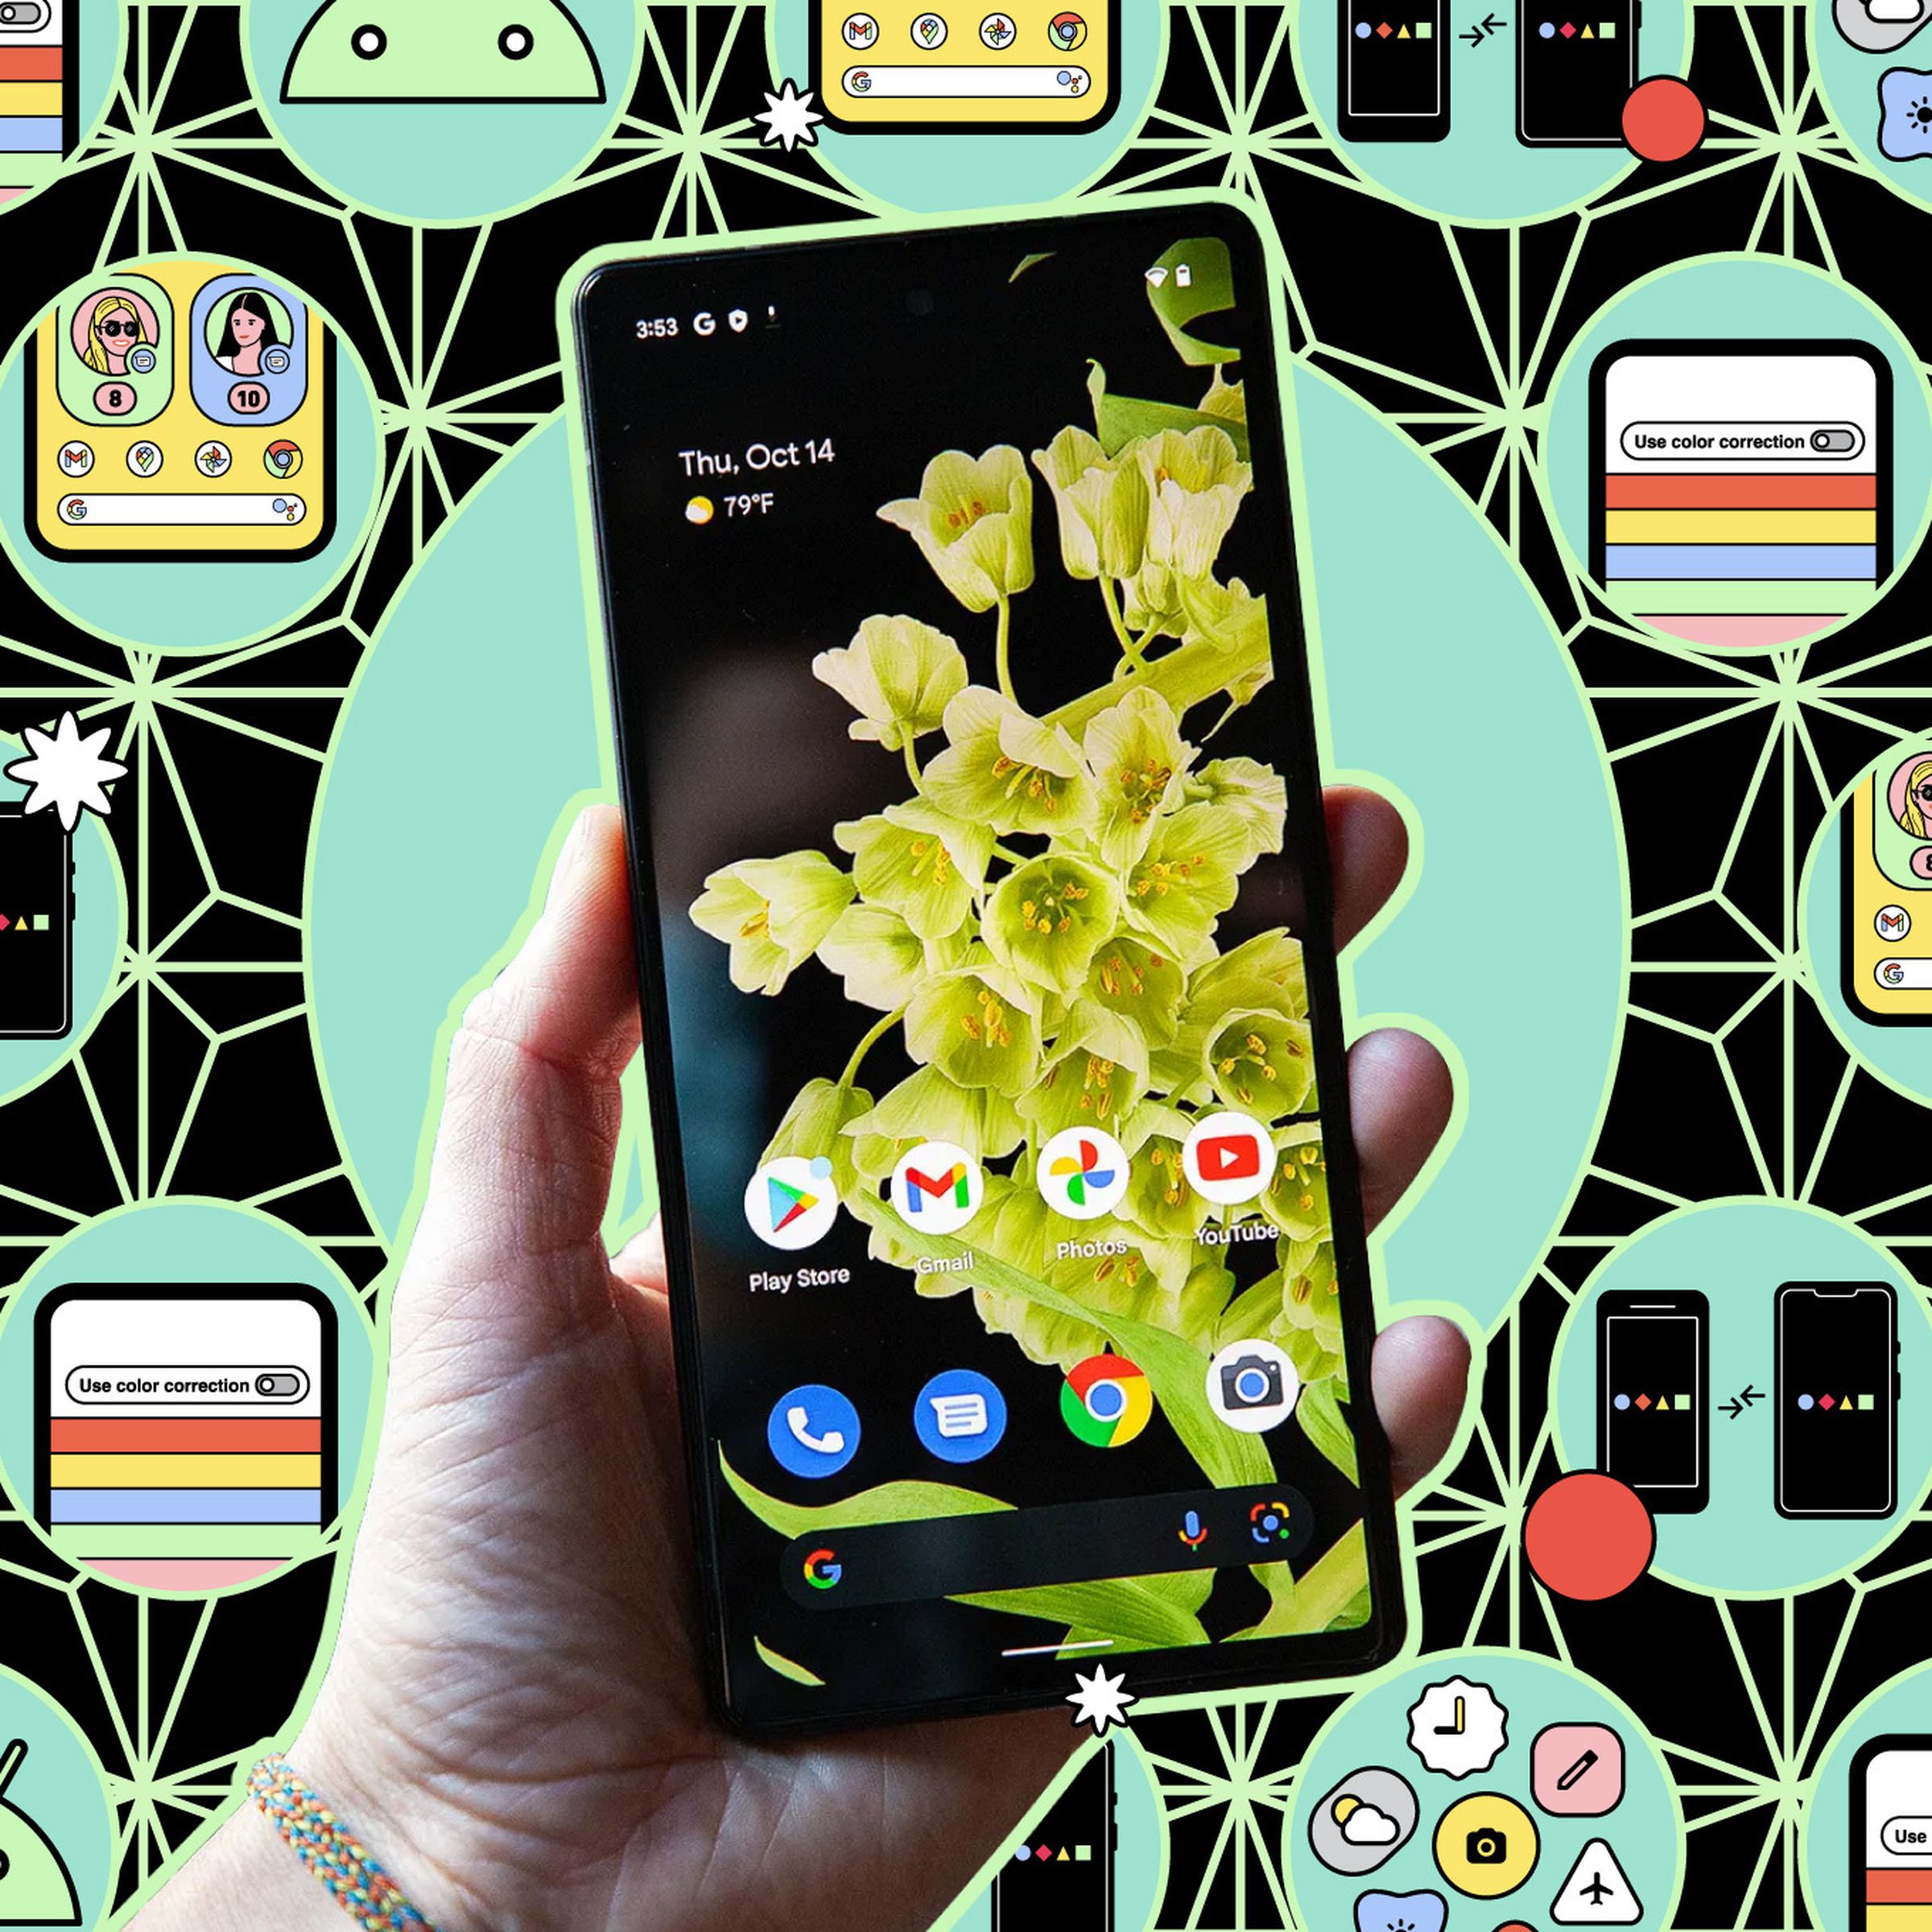 Hand holding Android phone against illustrated background